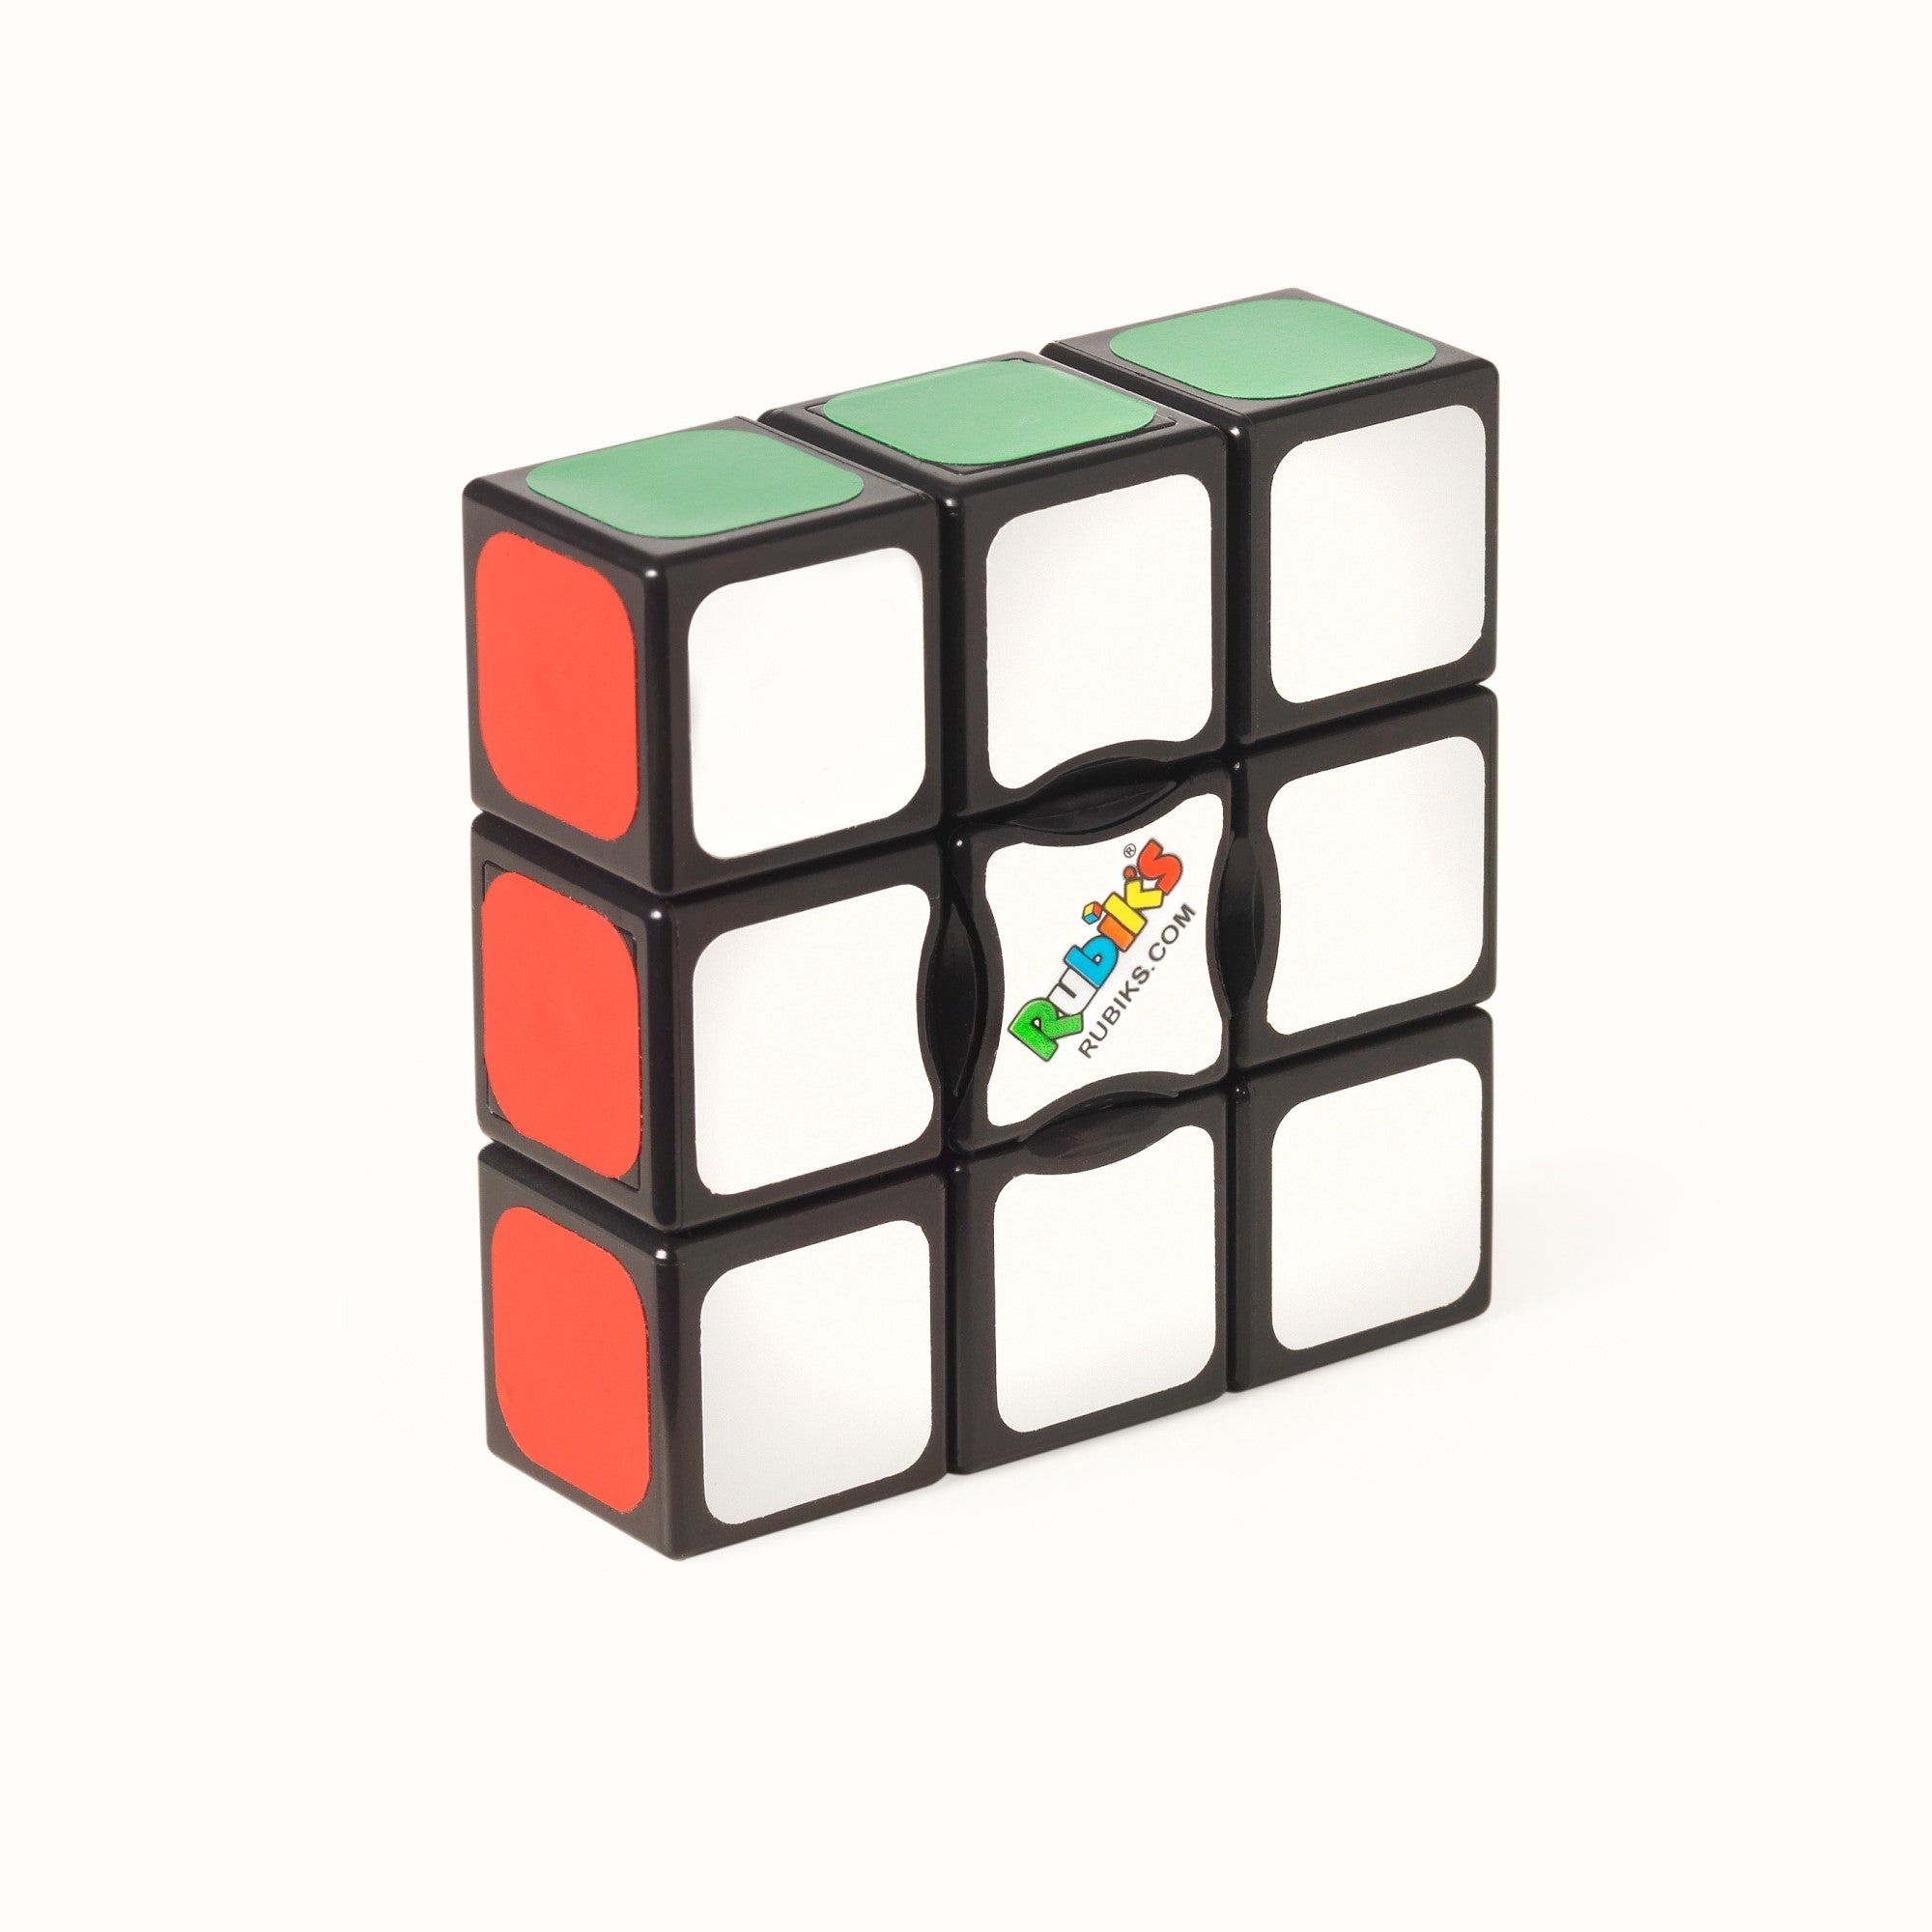 Rubiks Cube, 3x3 Magnetic Speed Cube, Super Fast Problem-Solving  Challenging Retro Fidget Toy Travel Brain Teaser, for Adults & Kids Ages 8  and up 